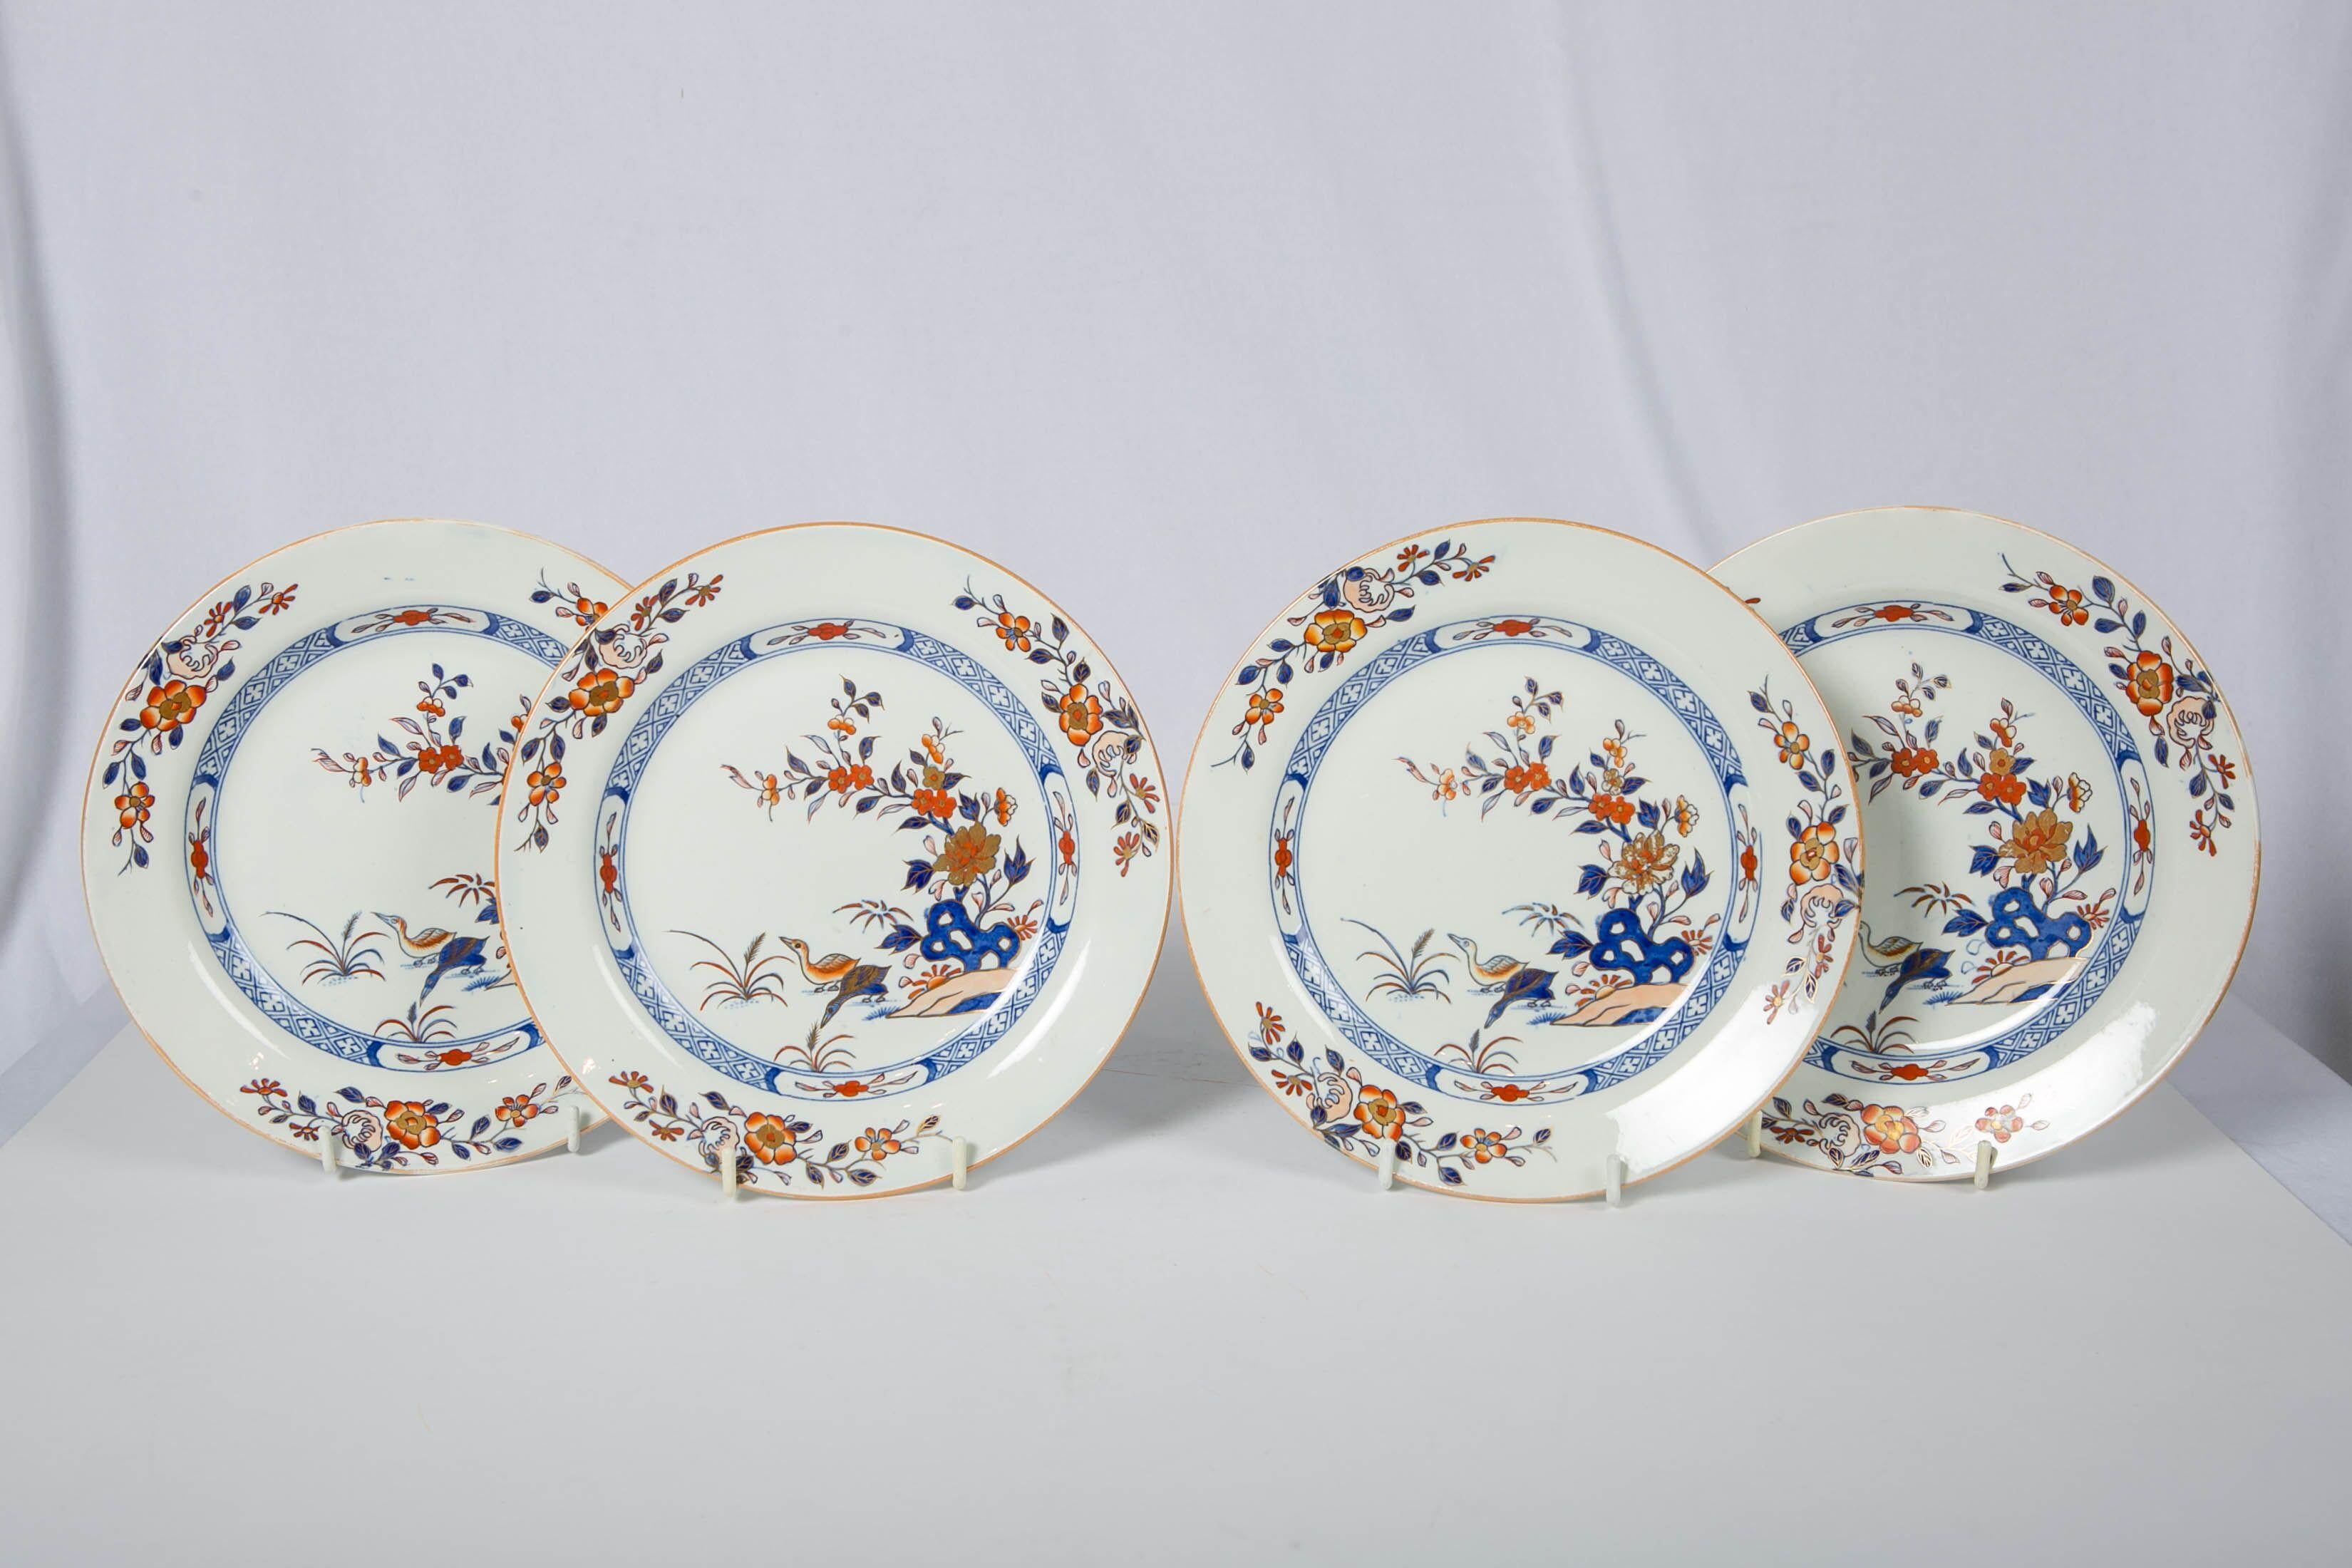 We are pleased to offer this set of four Wedgwood dessert dishes showing a simply beautiful scene with a pair of ducks by the water's edge. Nearby are a flowering fruit tree and rockwork painted in Imari colors of iron red, cobalt blue, and